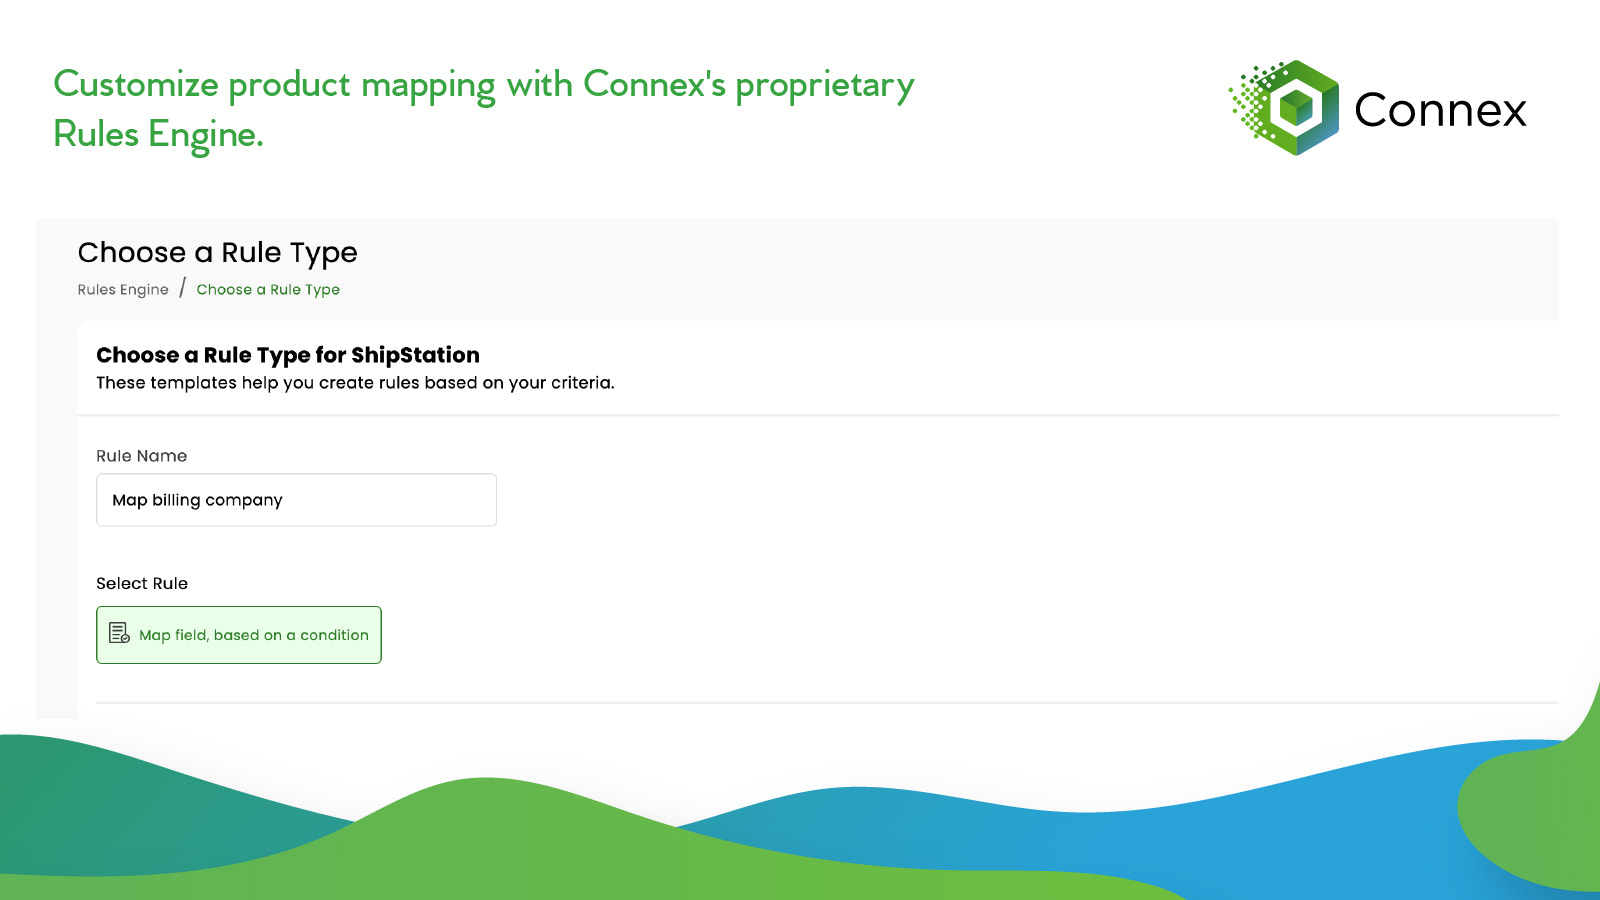 Customize product mapping with Connex's proprietary Rules Engine